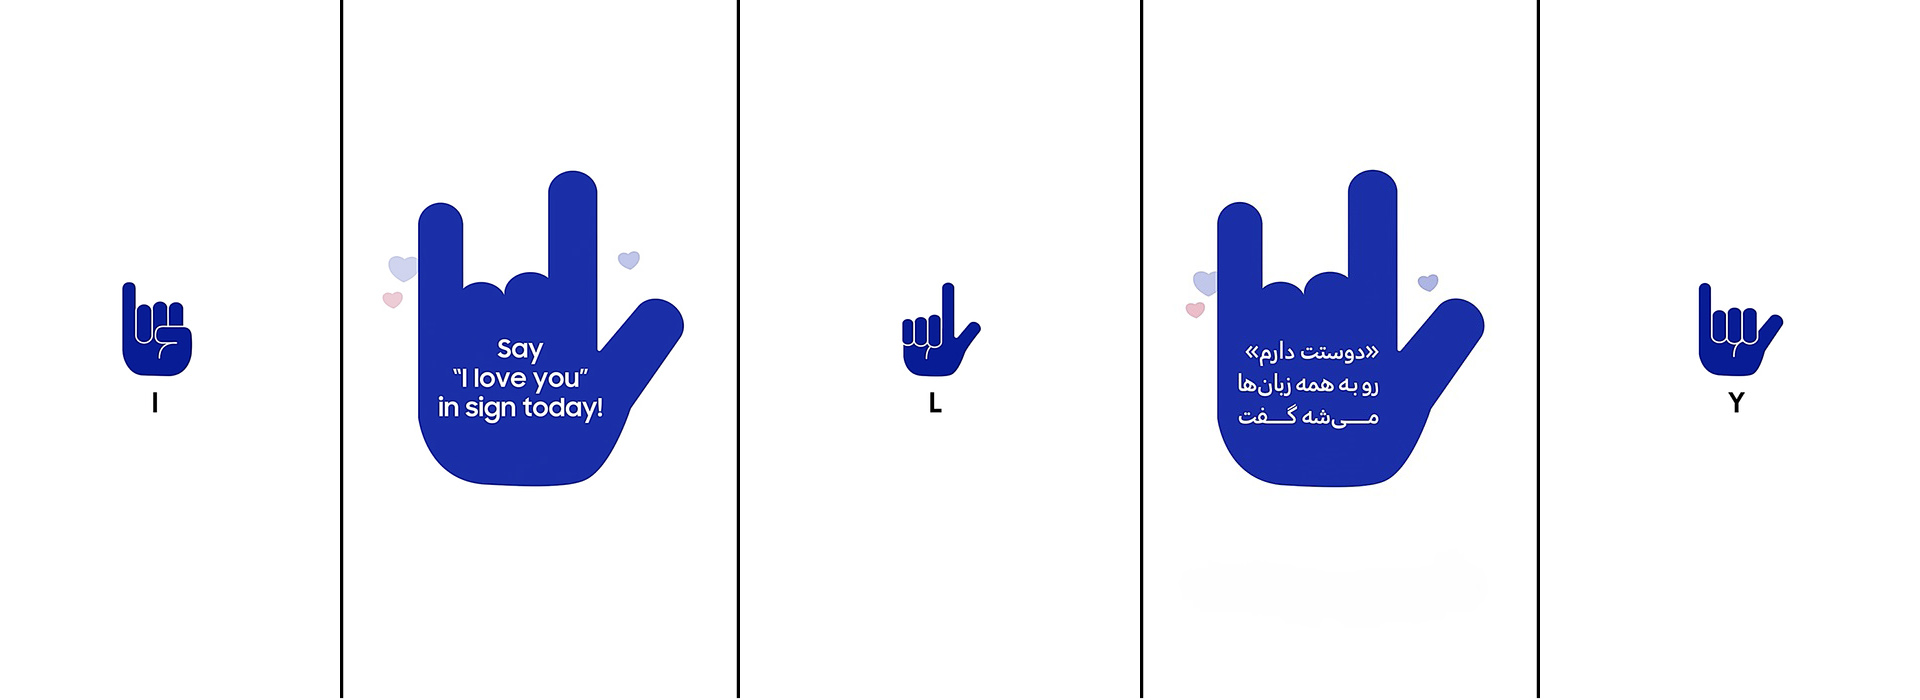 Multiple hands showing "I love you" in sign language